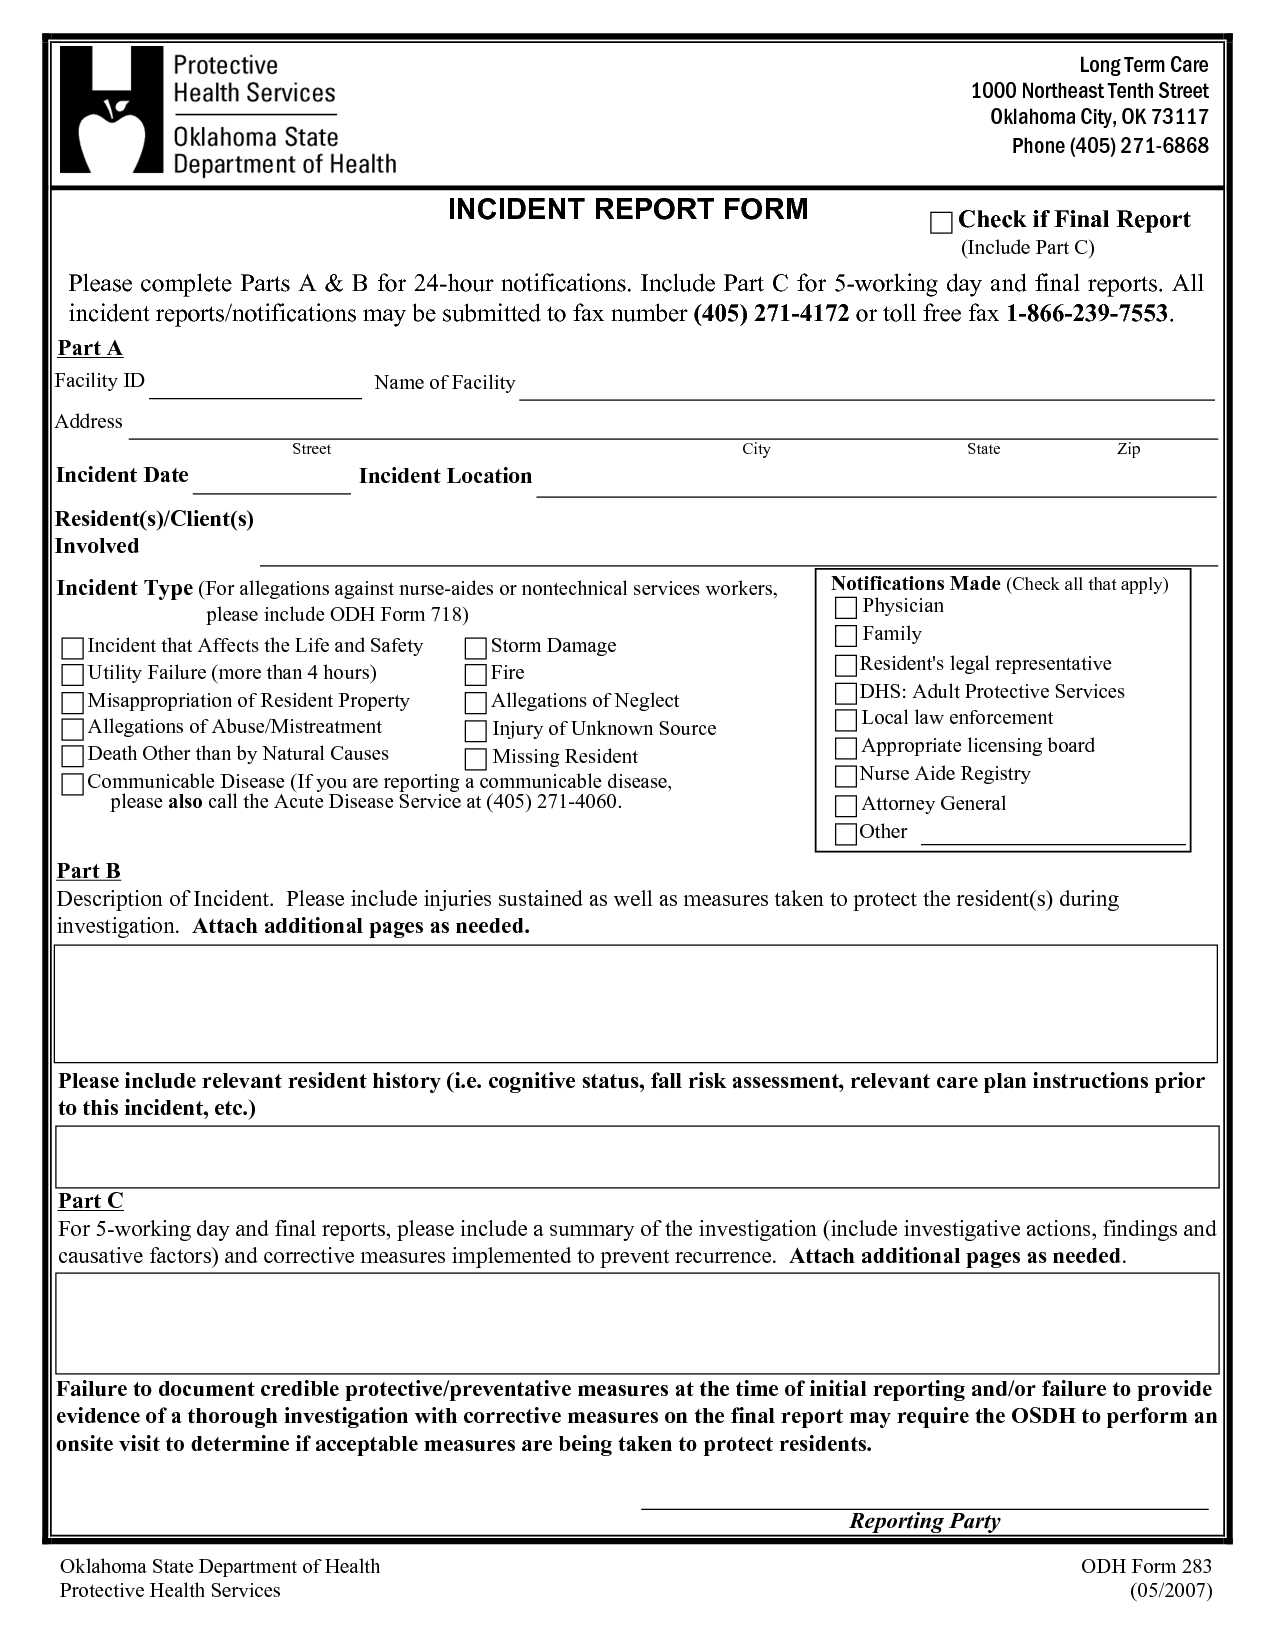 Best Photos Of Incident Report Template Microsoft Word Throughout Incident Report Template Microsoft